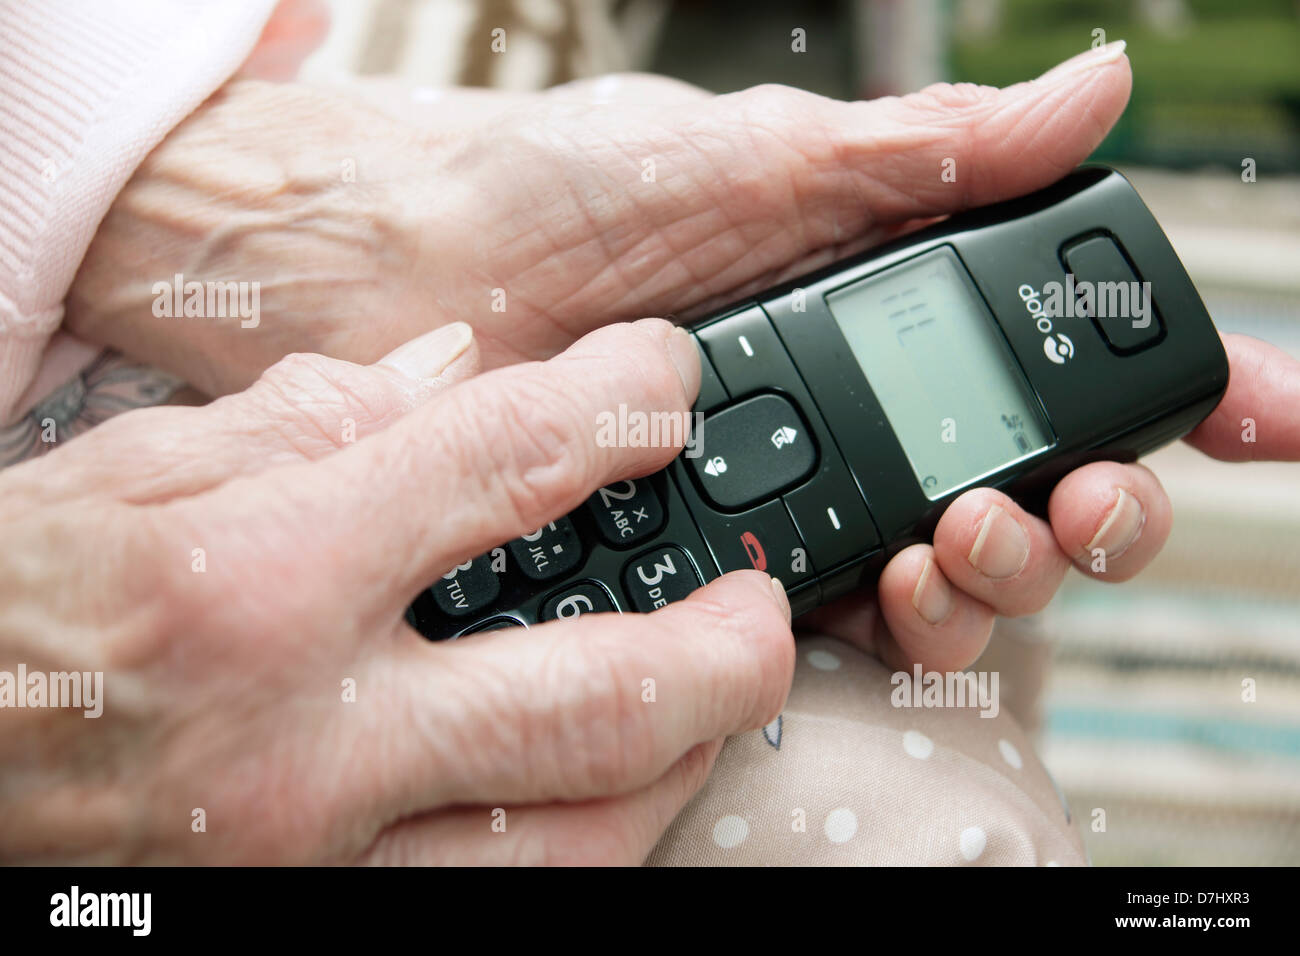 Elderly woman using a specialised big button telephone phoning the 111 non emergency medical advice helpline due to feeling ill Stock Photo